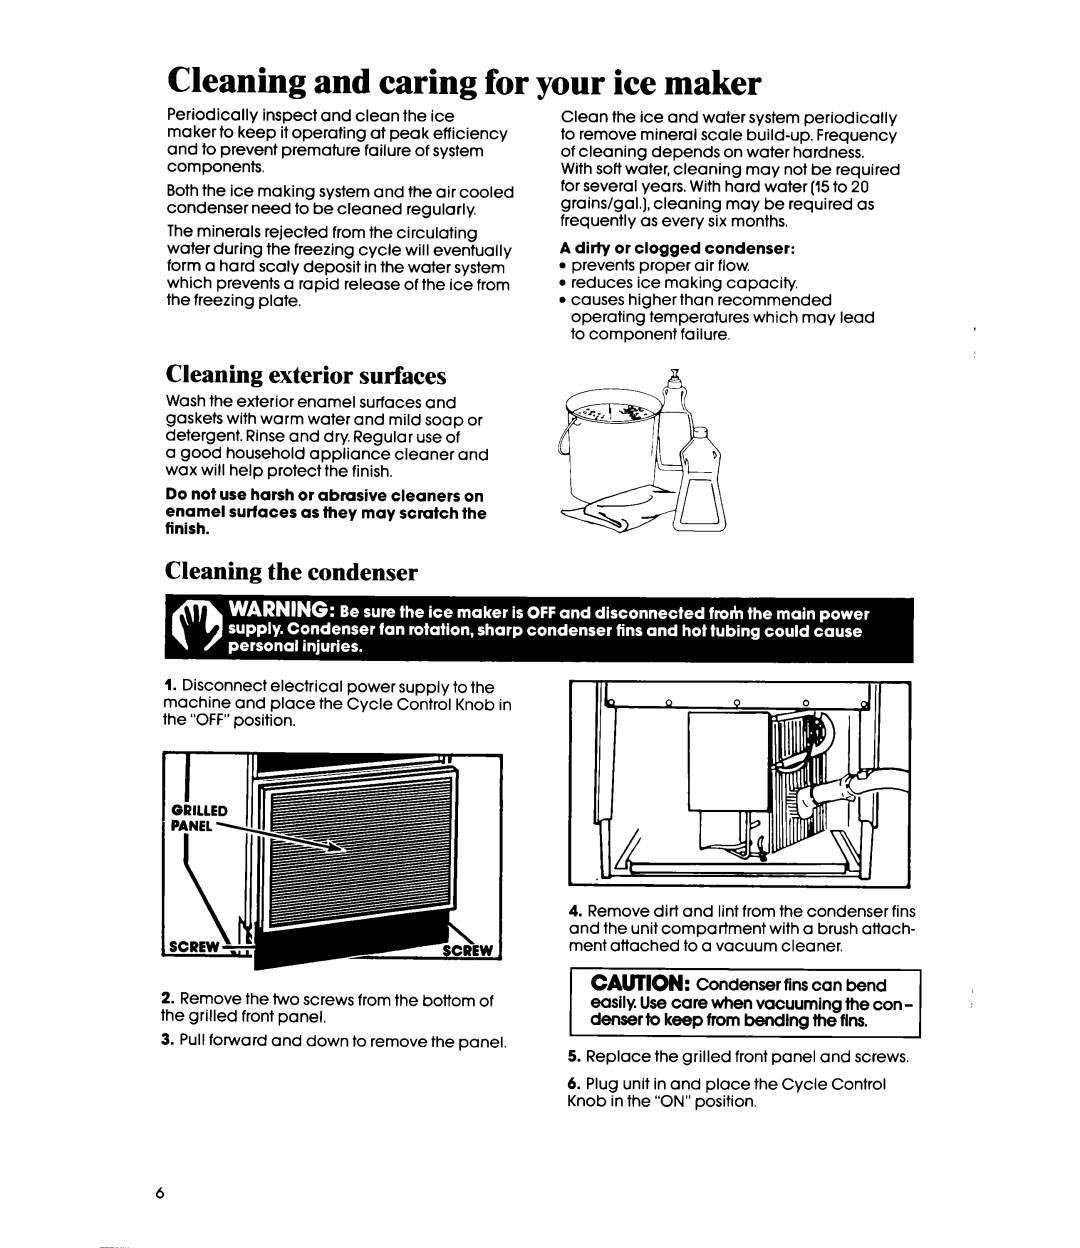 Whirlpool EC5100XP manual Cleaning and caring for your ice maker, Cleaning exterior surfaces, Cleaning the condenser 